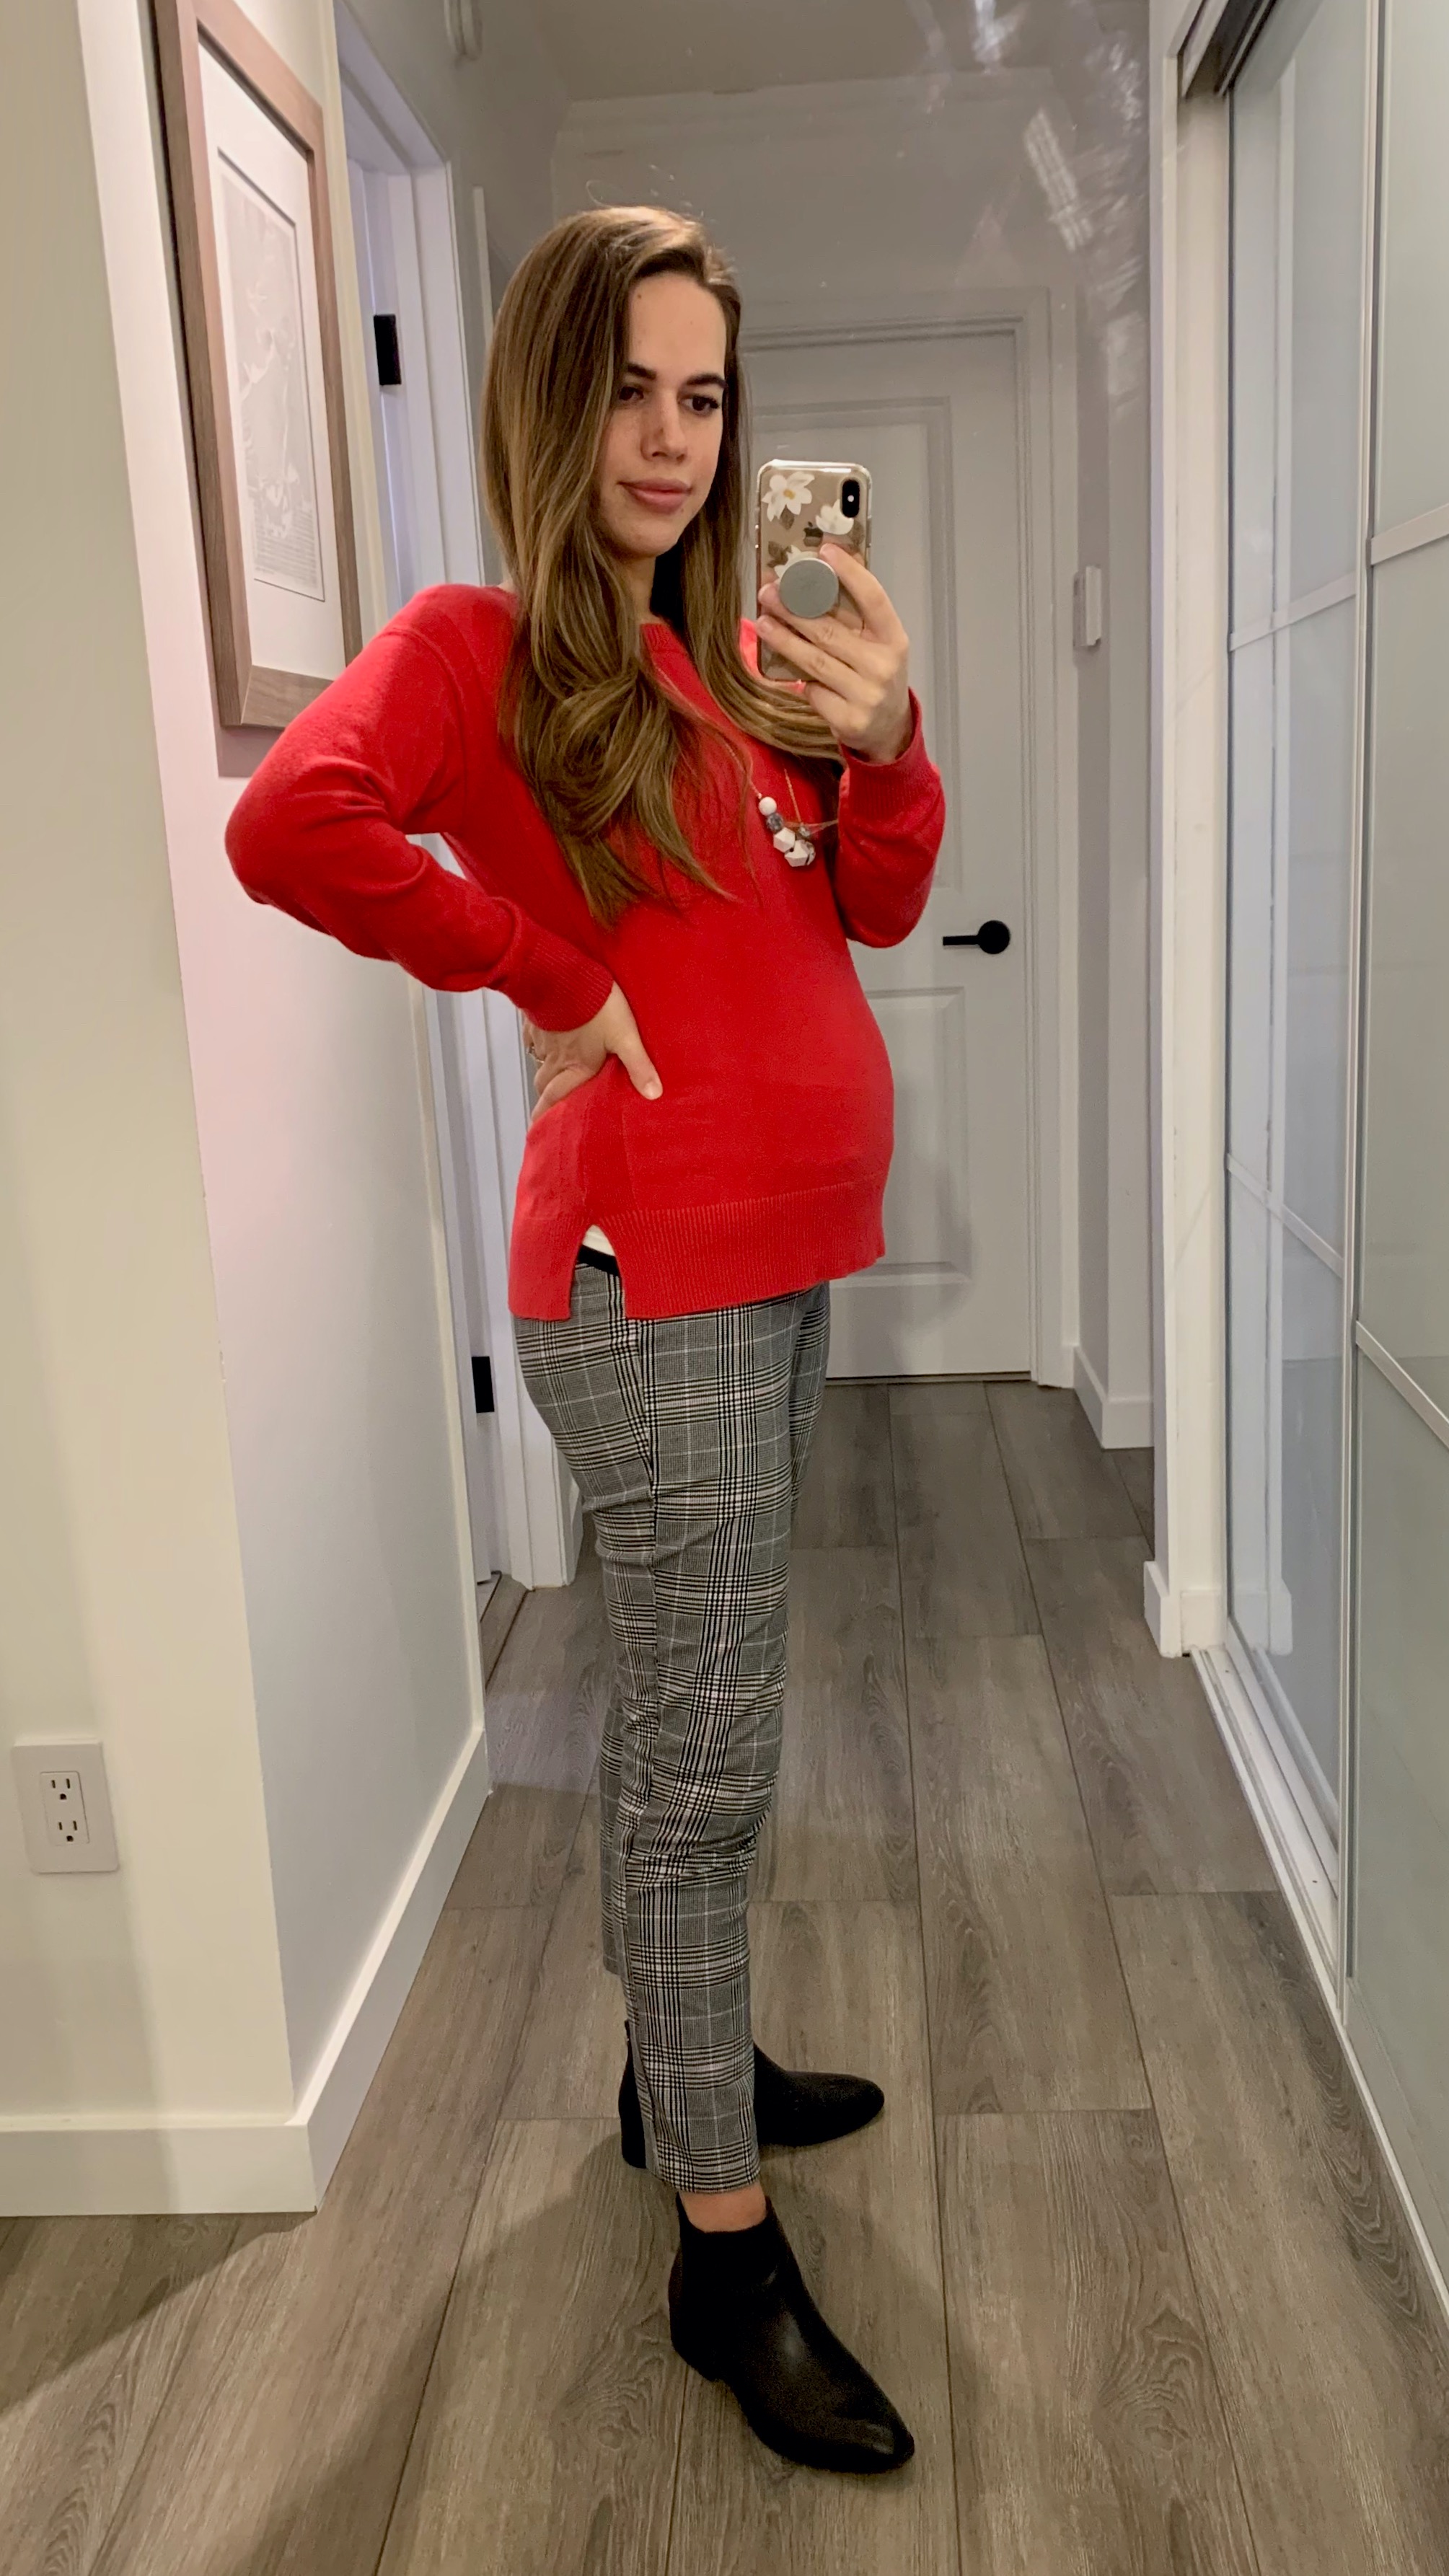 Jules in Flats - Festive Work Outfit with Red Sweater & Plaid Pants (Business Casual Workwear on a Budget)